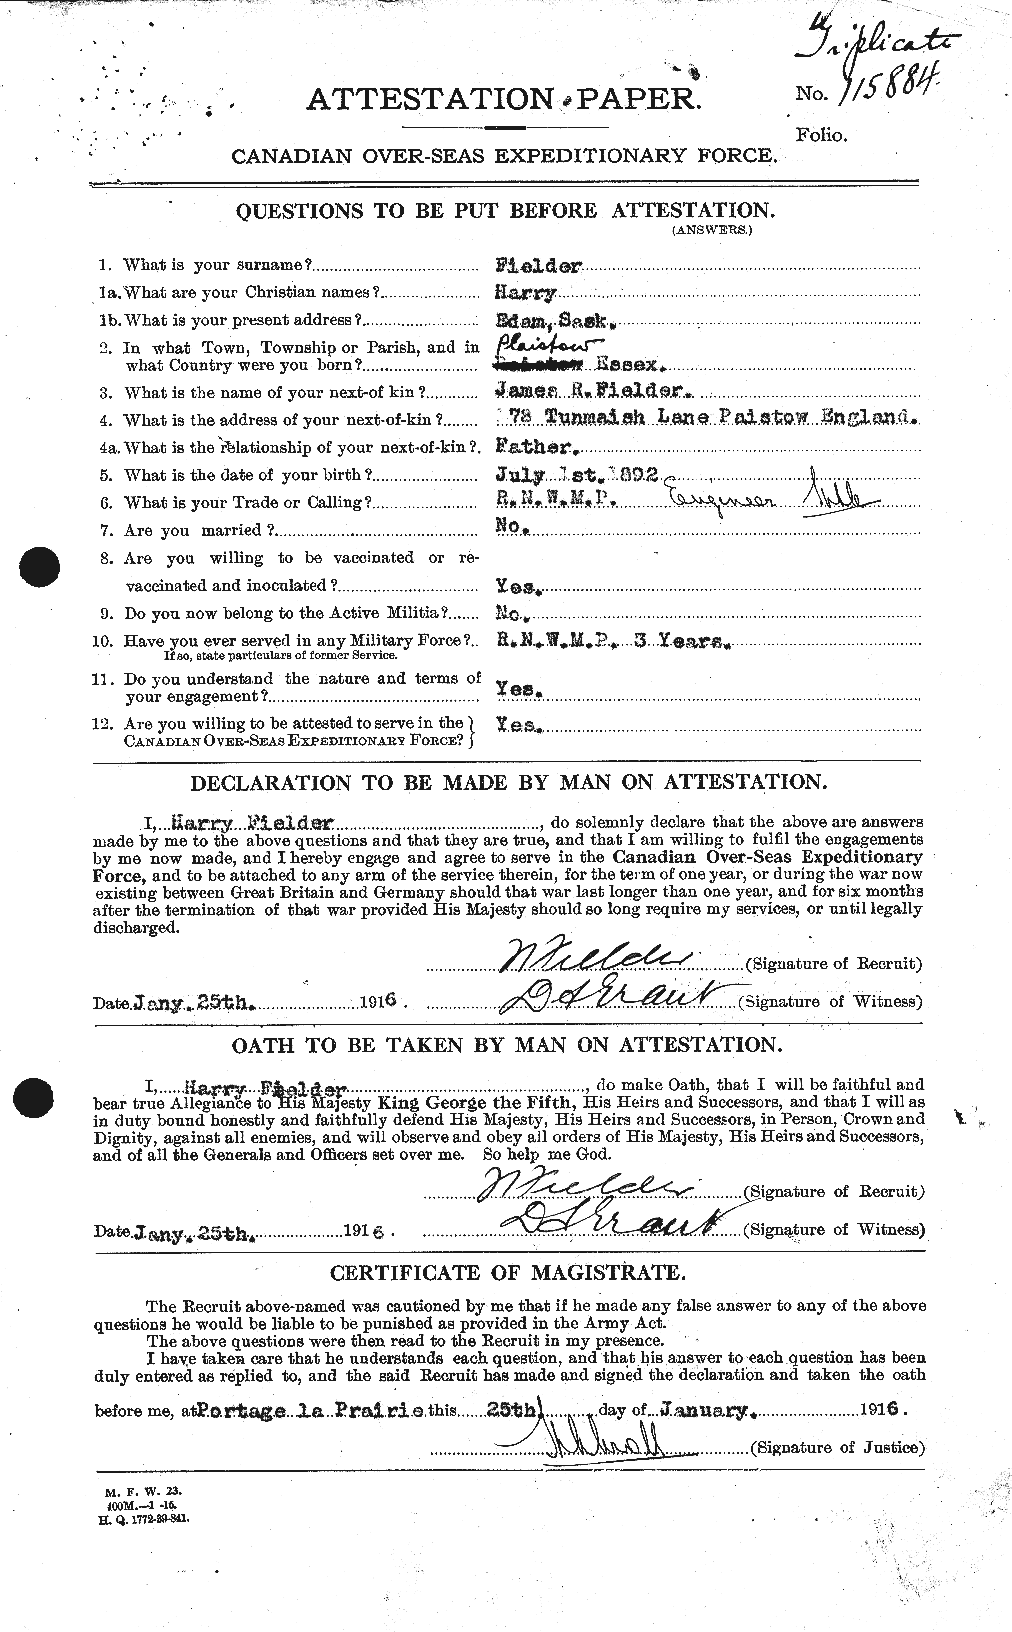 Personnel Records of the First World War - CEF 327372a